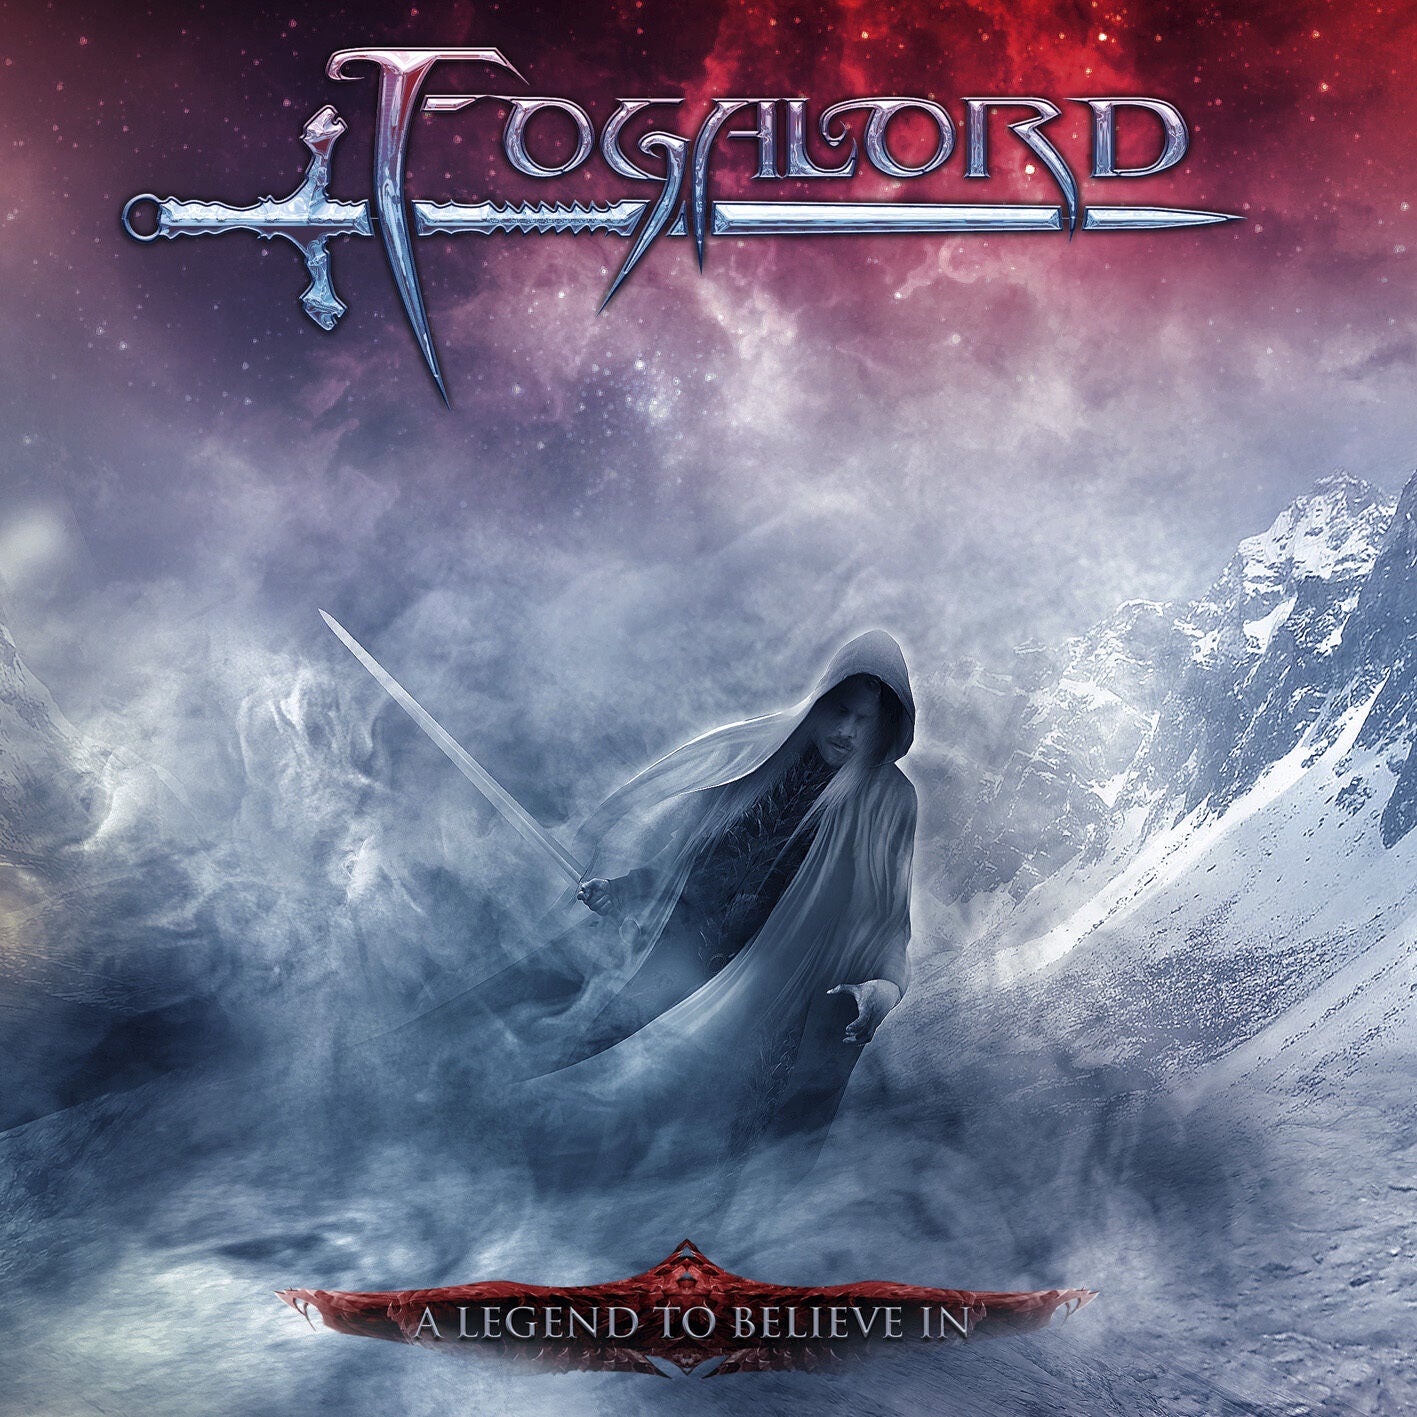 FOGALORD - A Legend To Believe In CD 2012 Symphonic Epic Power Metal